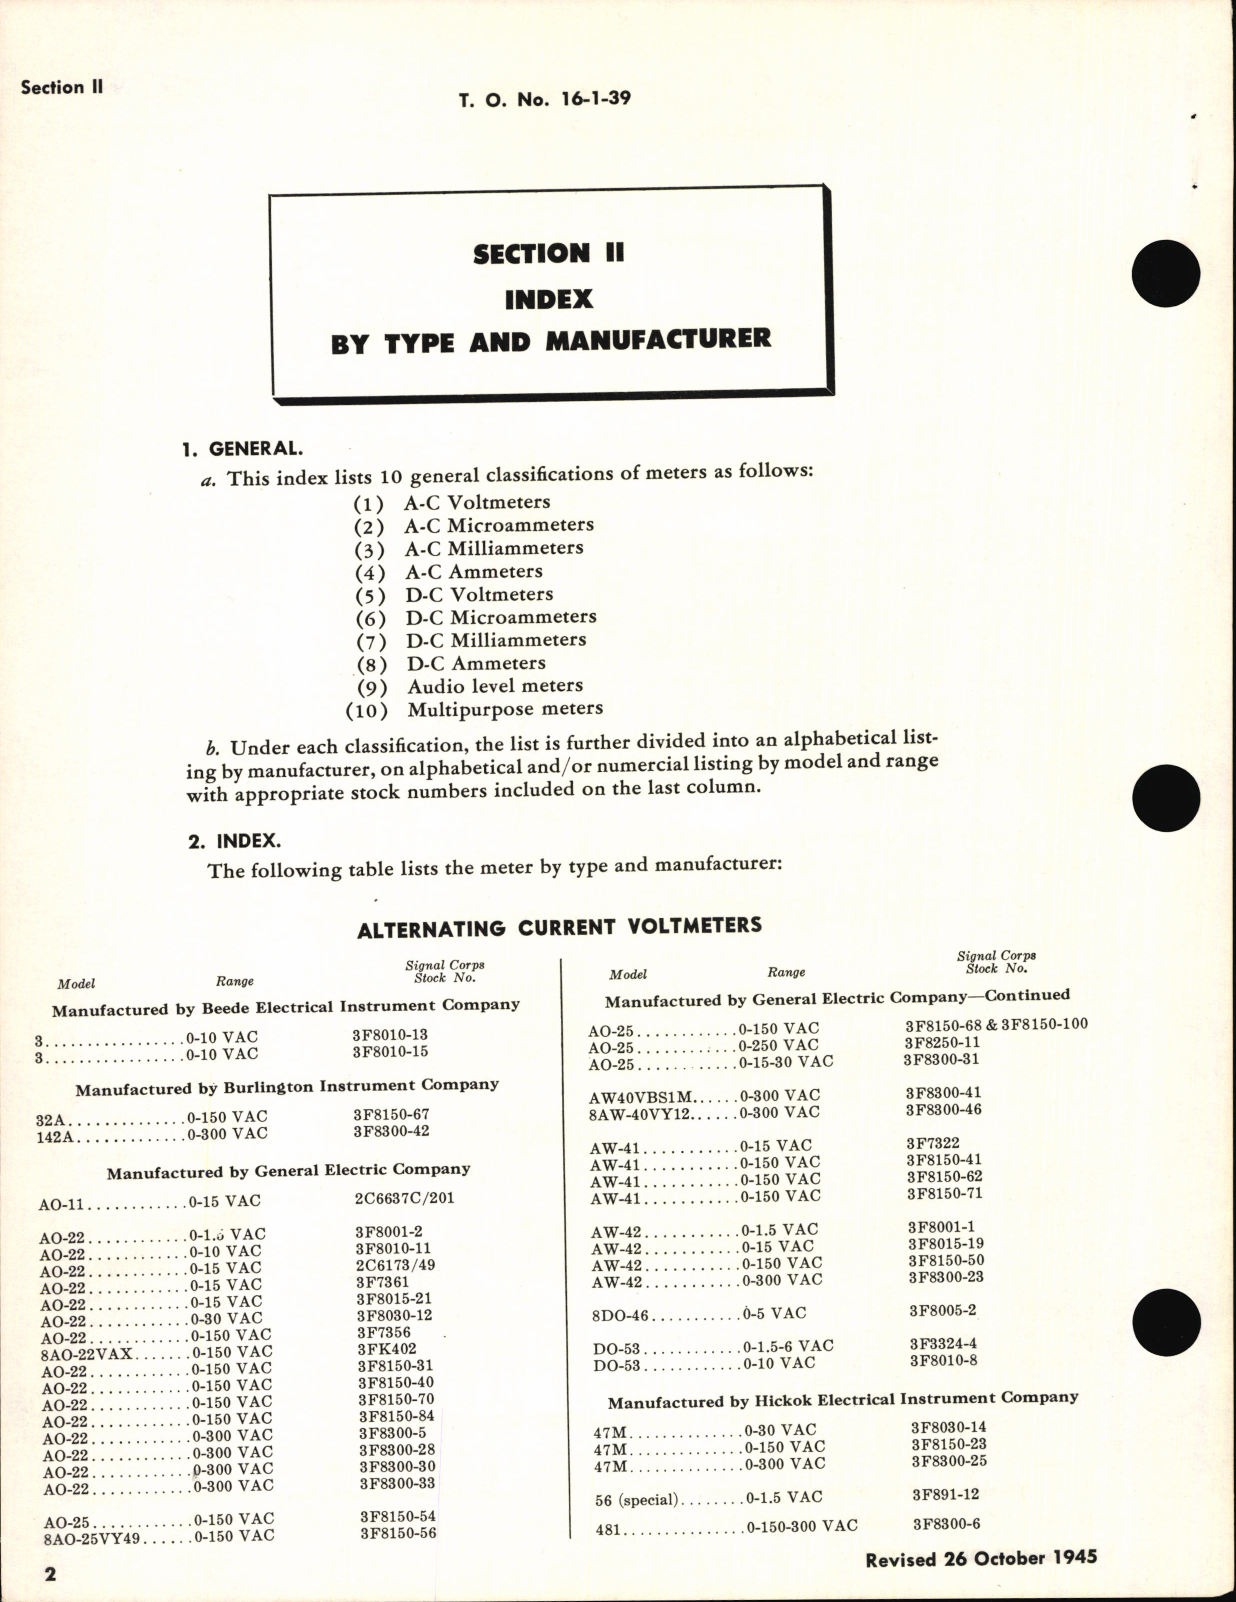 Sample page 8 from AirCorps Library document: Characteristics and Parts List for Electrical Meters Used in Communications Equipment